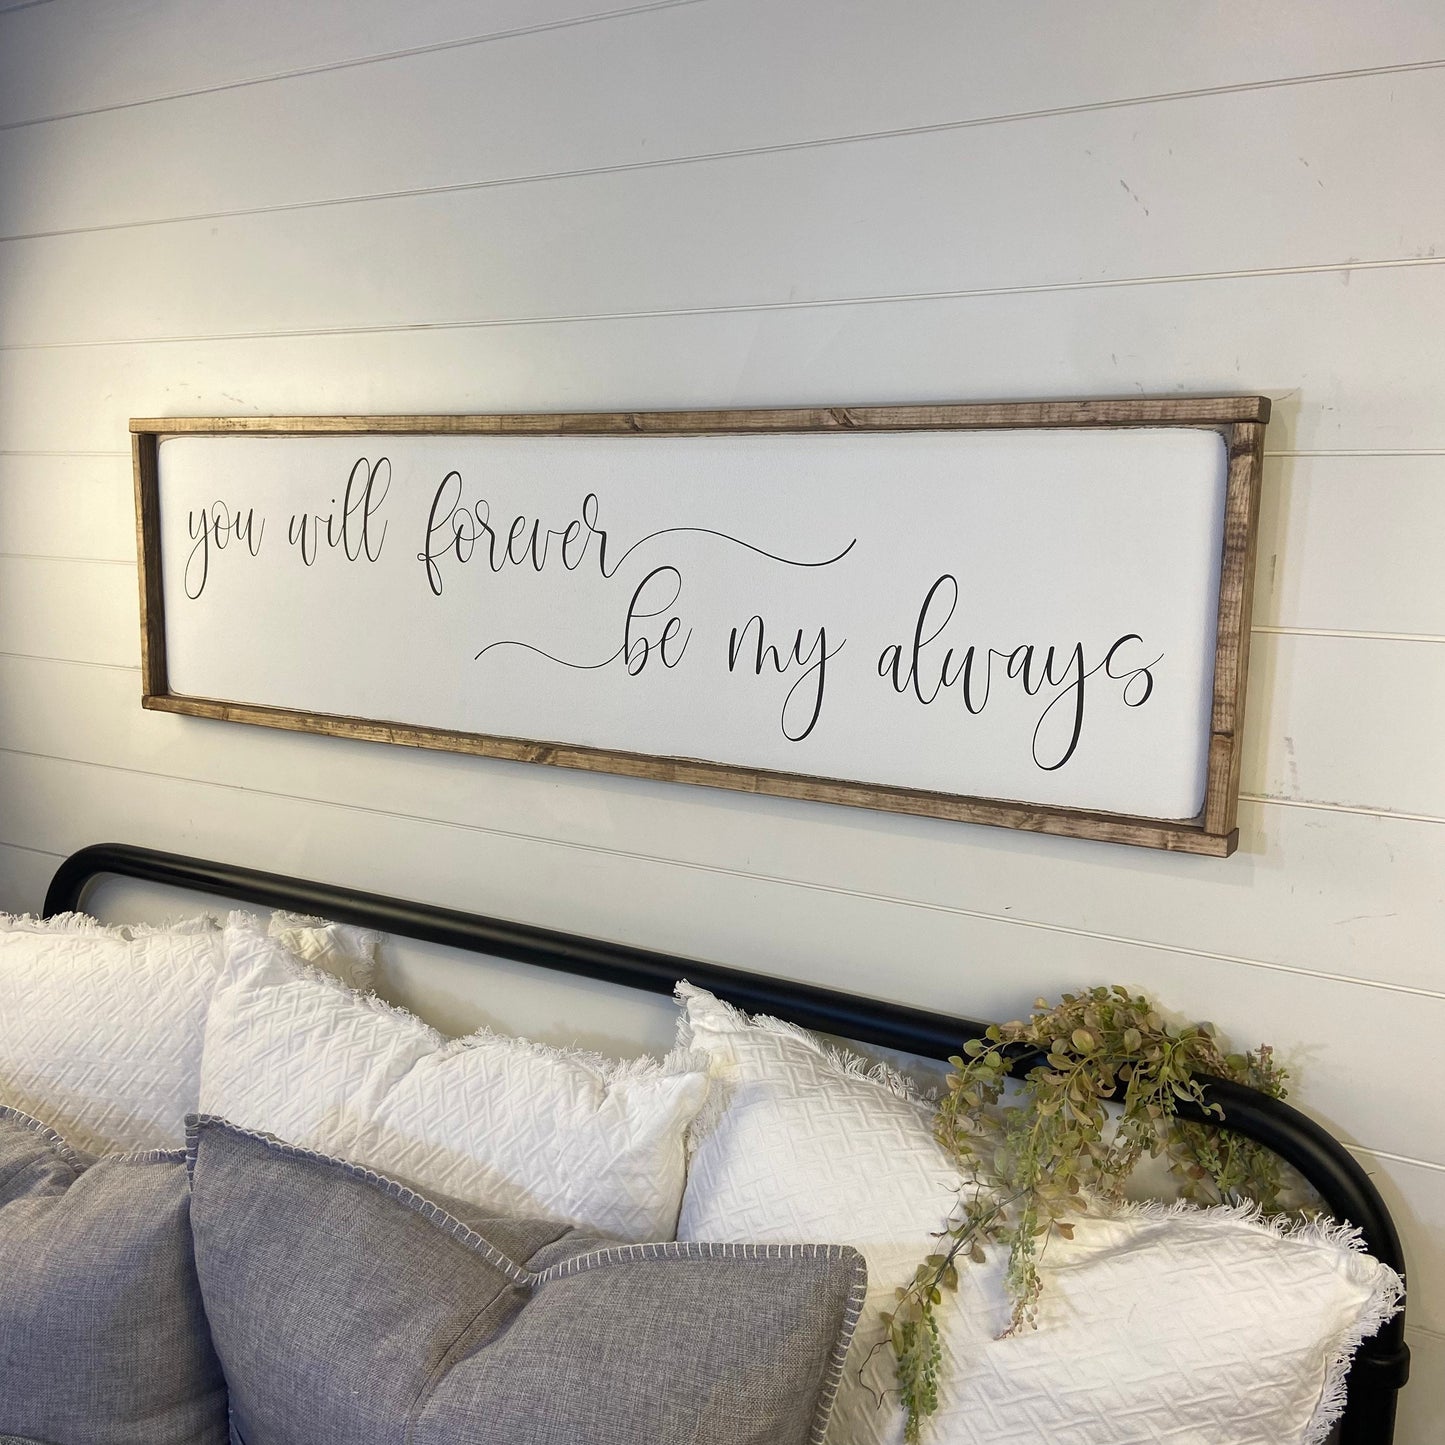 you will forever be my always - above over the bed sign - master bedroom wall art [FREE SHIPPING!]